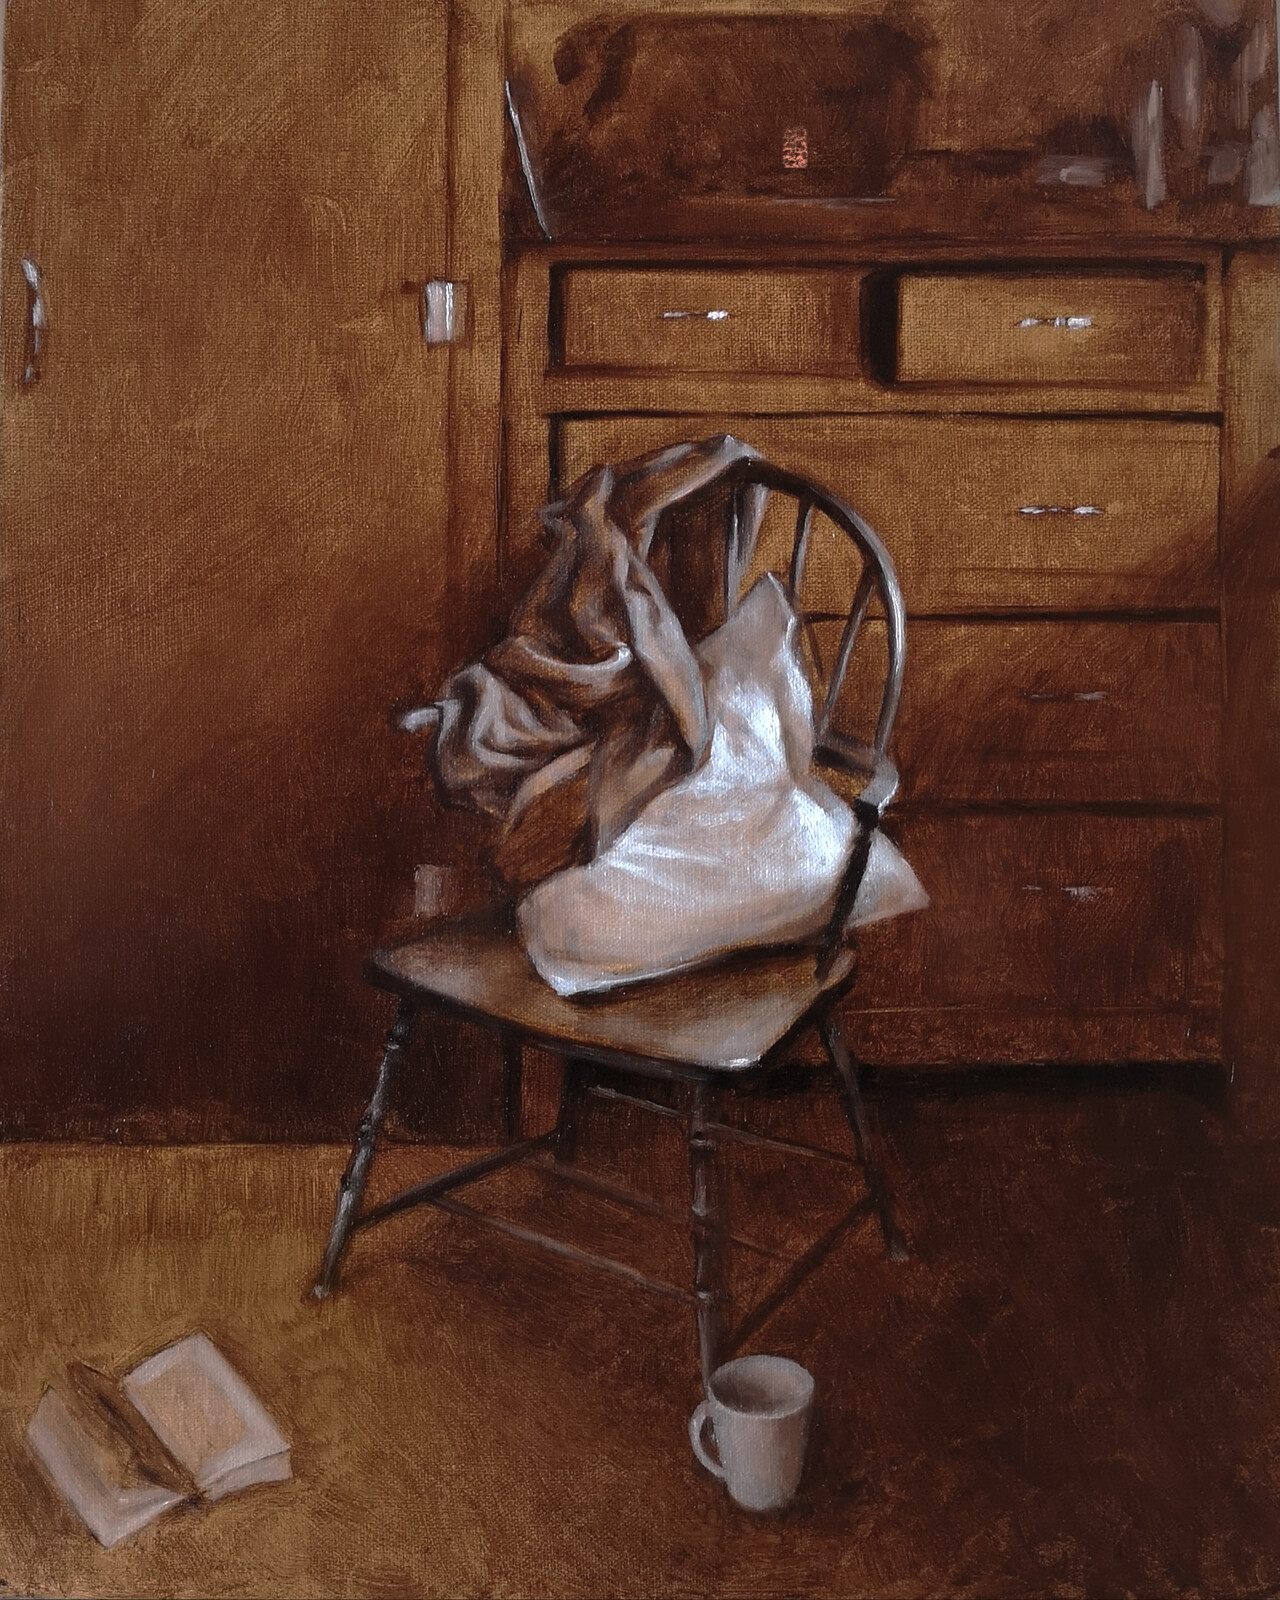 The Afternoon Reading, Oil on linen panel, 11x14